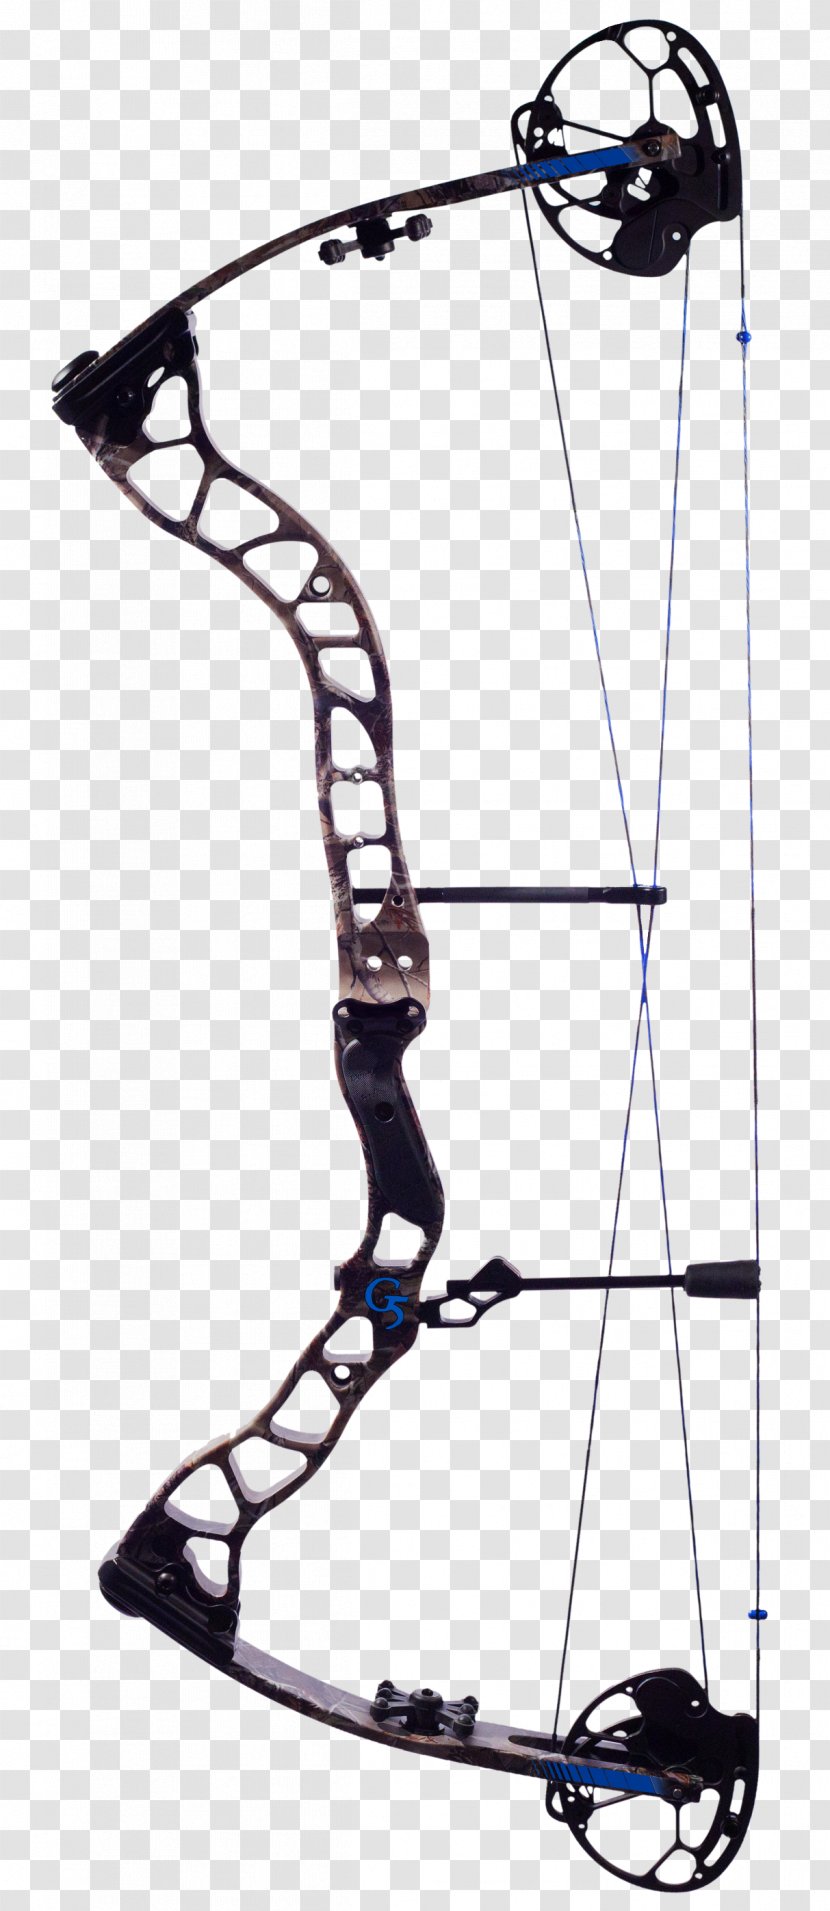 Compound Bows Bow And Arrow Archery Hunting Transparent PNG